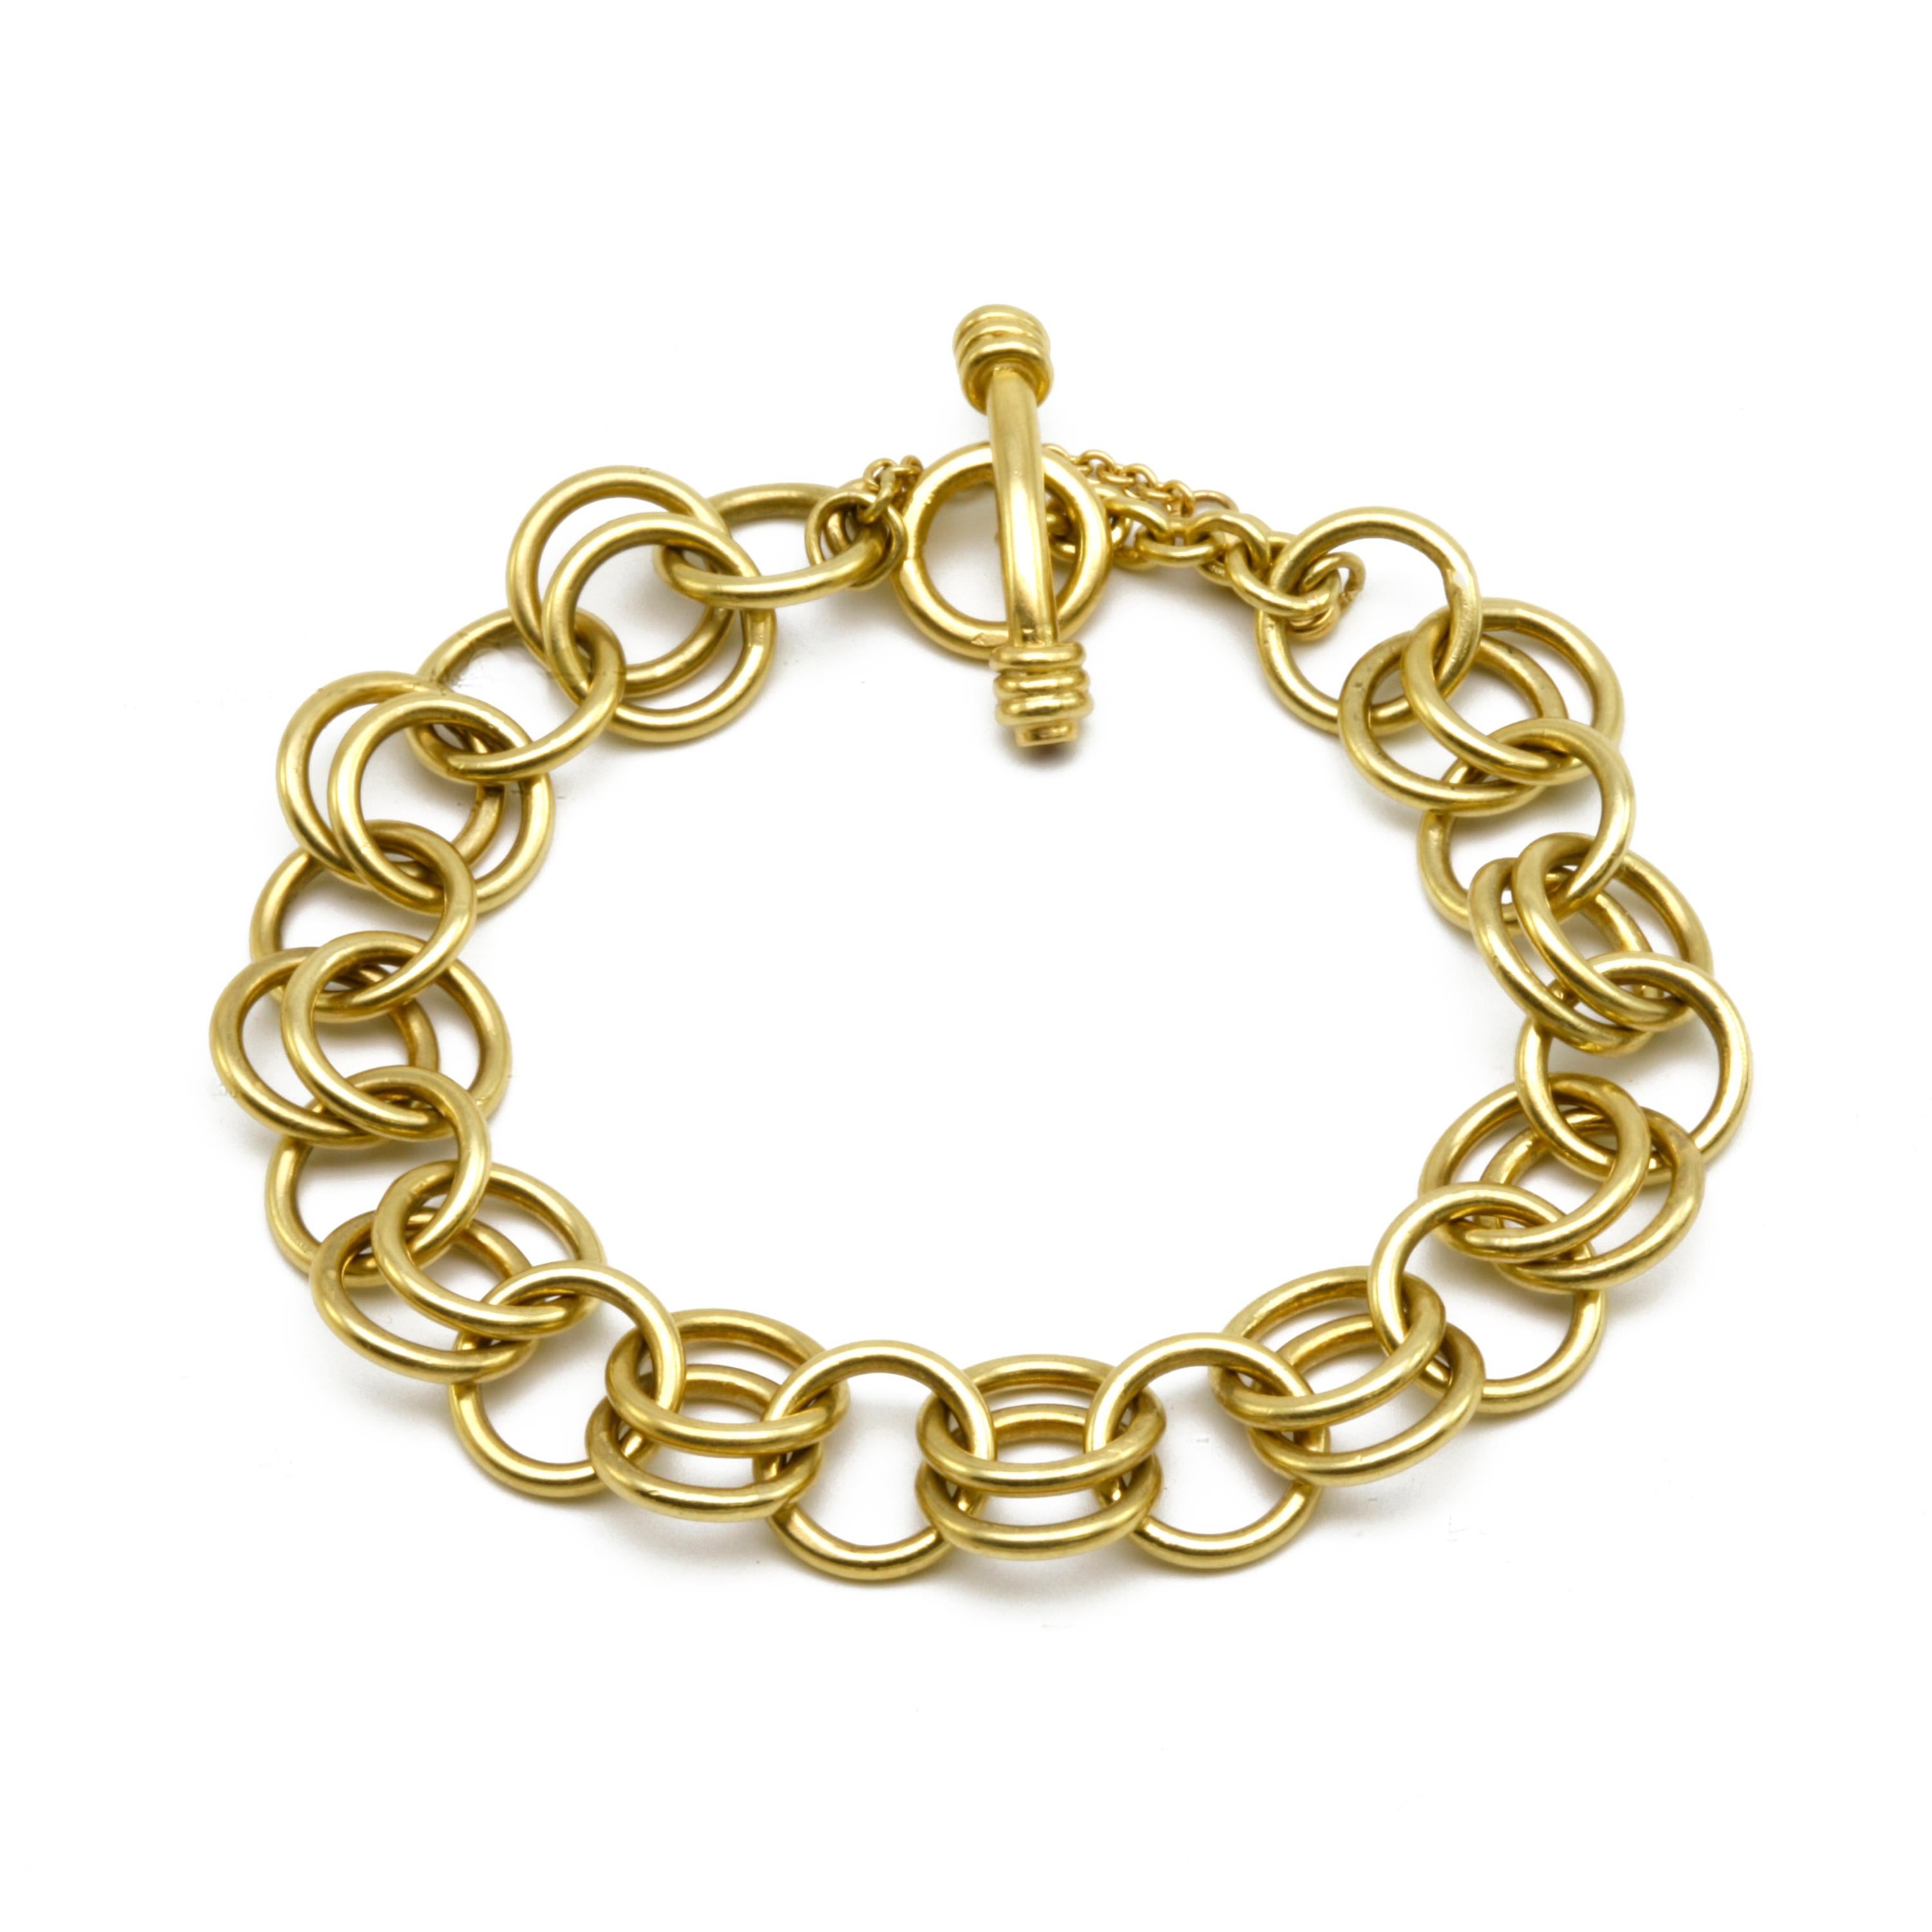 Hours of repetitive forming by hand go into this masterful chain. The double links traditionally allow for charms to double-up on each linked section should the wearer choose. Solid 18k gold. The toggle clasp has Ruby ends. Different link